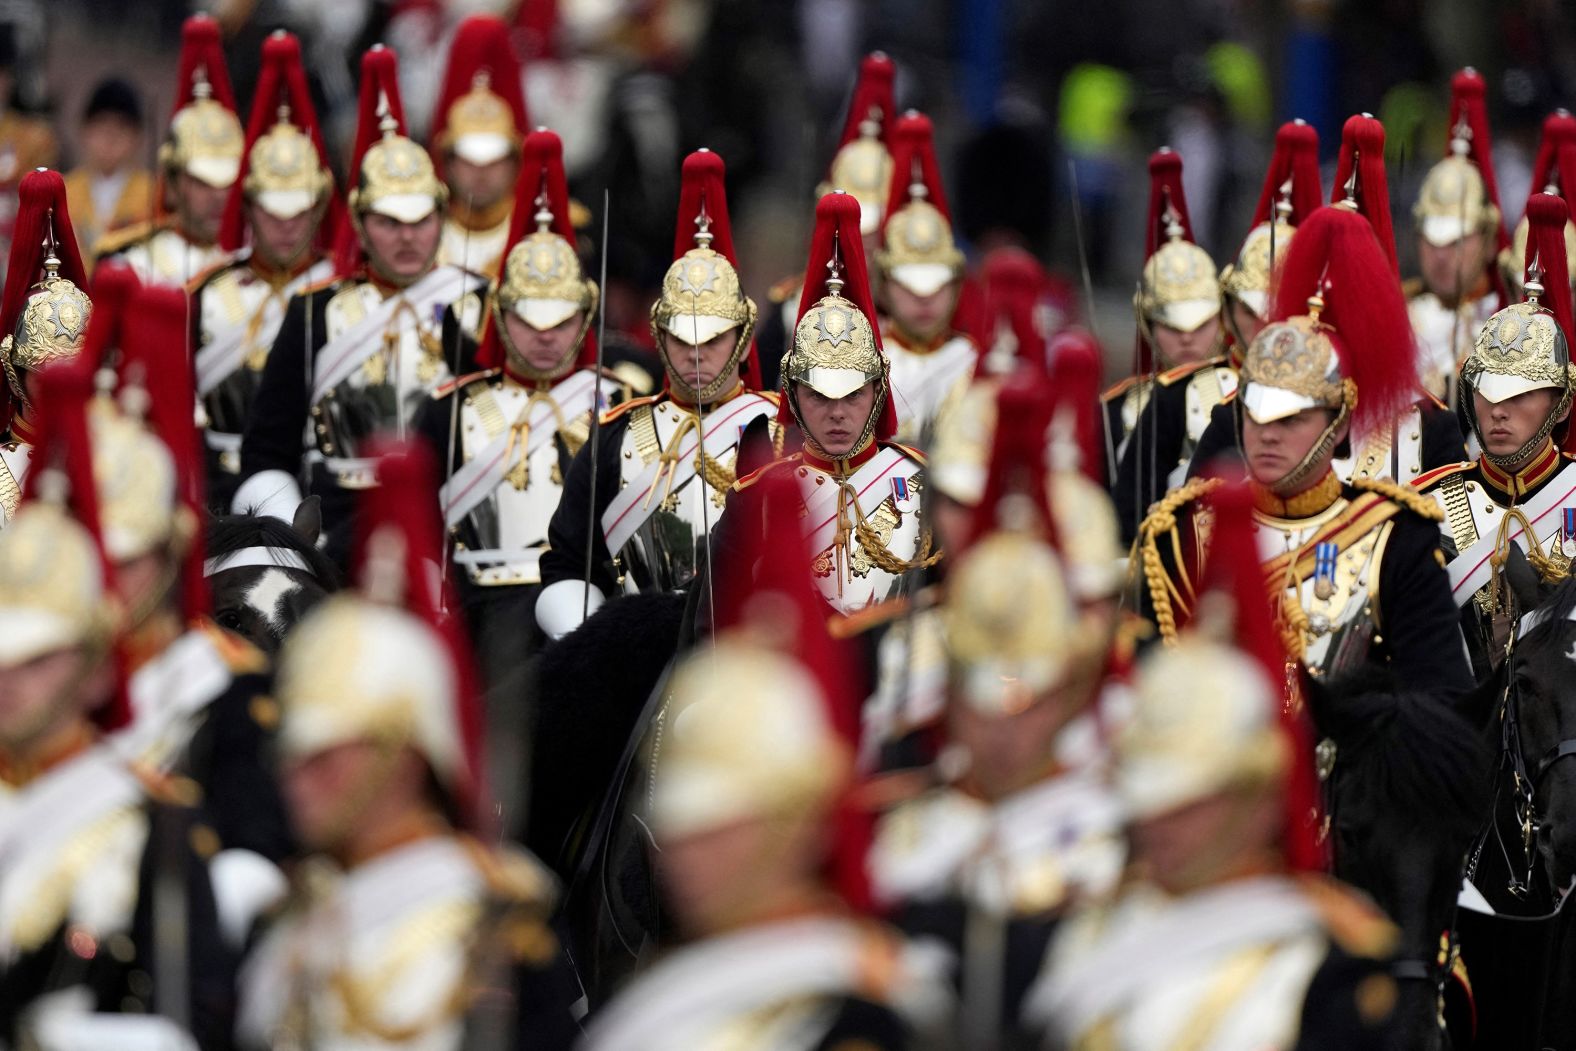 Soldiers parade during the People's Pageant in London on Sunday.